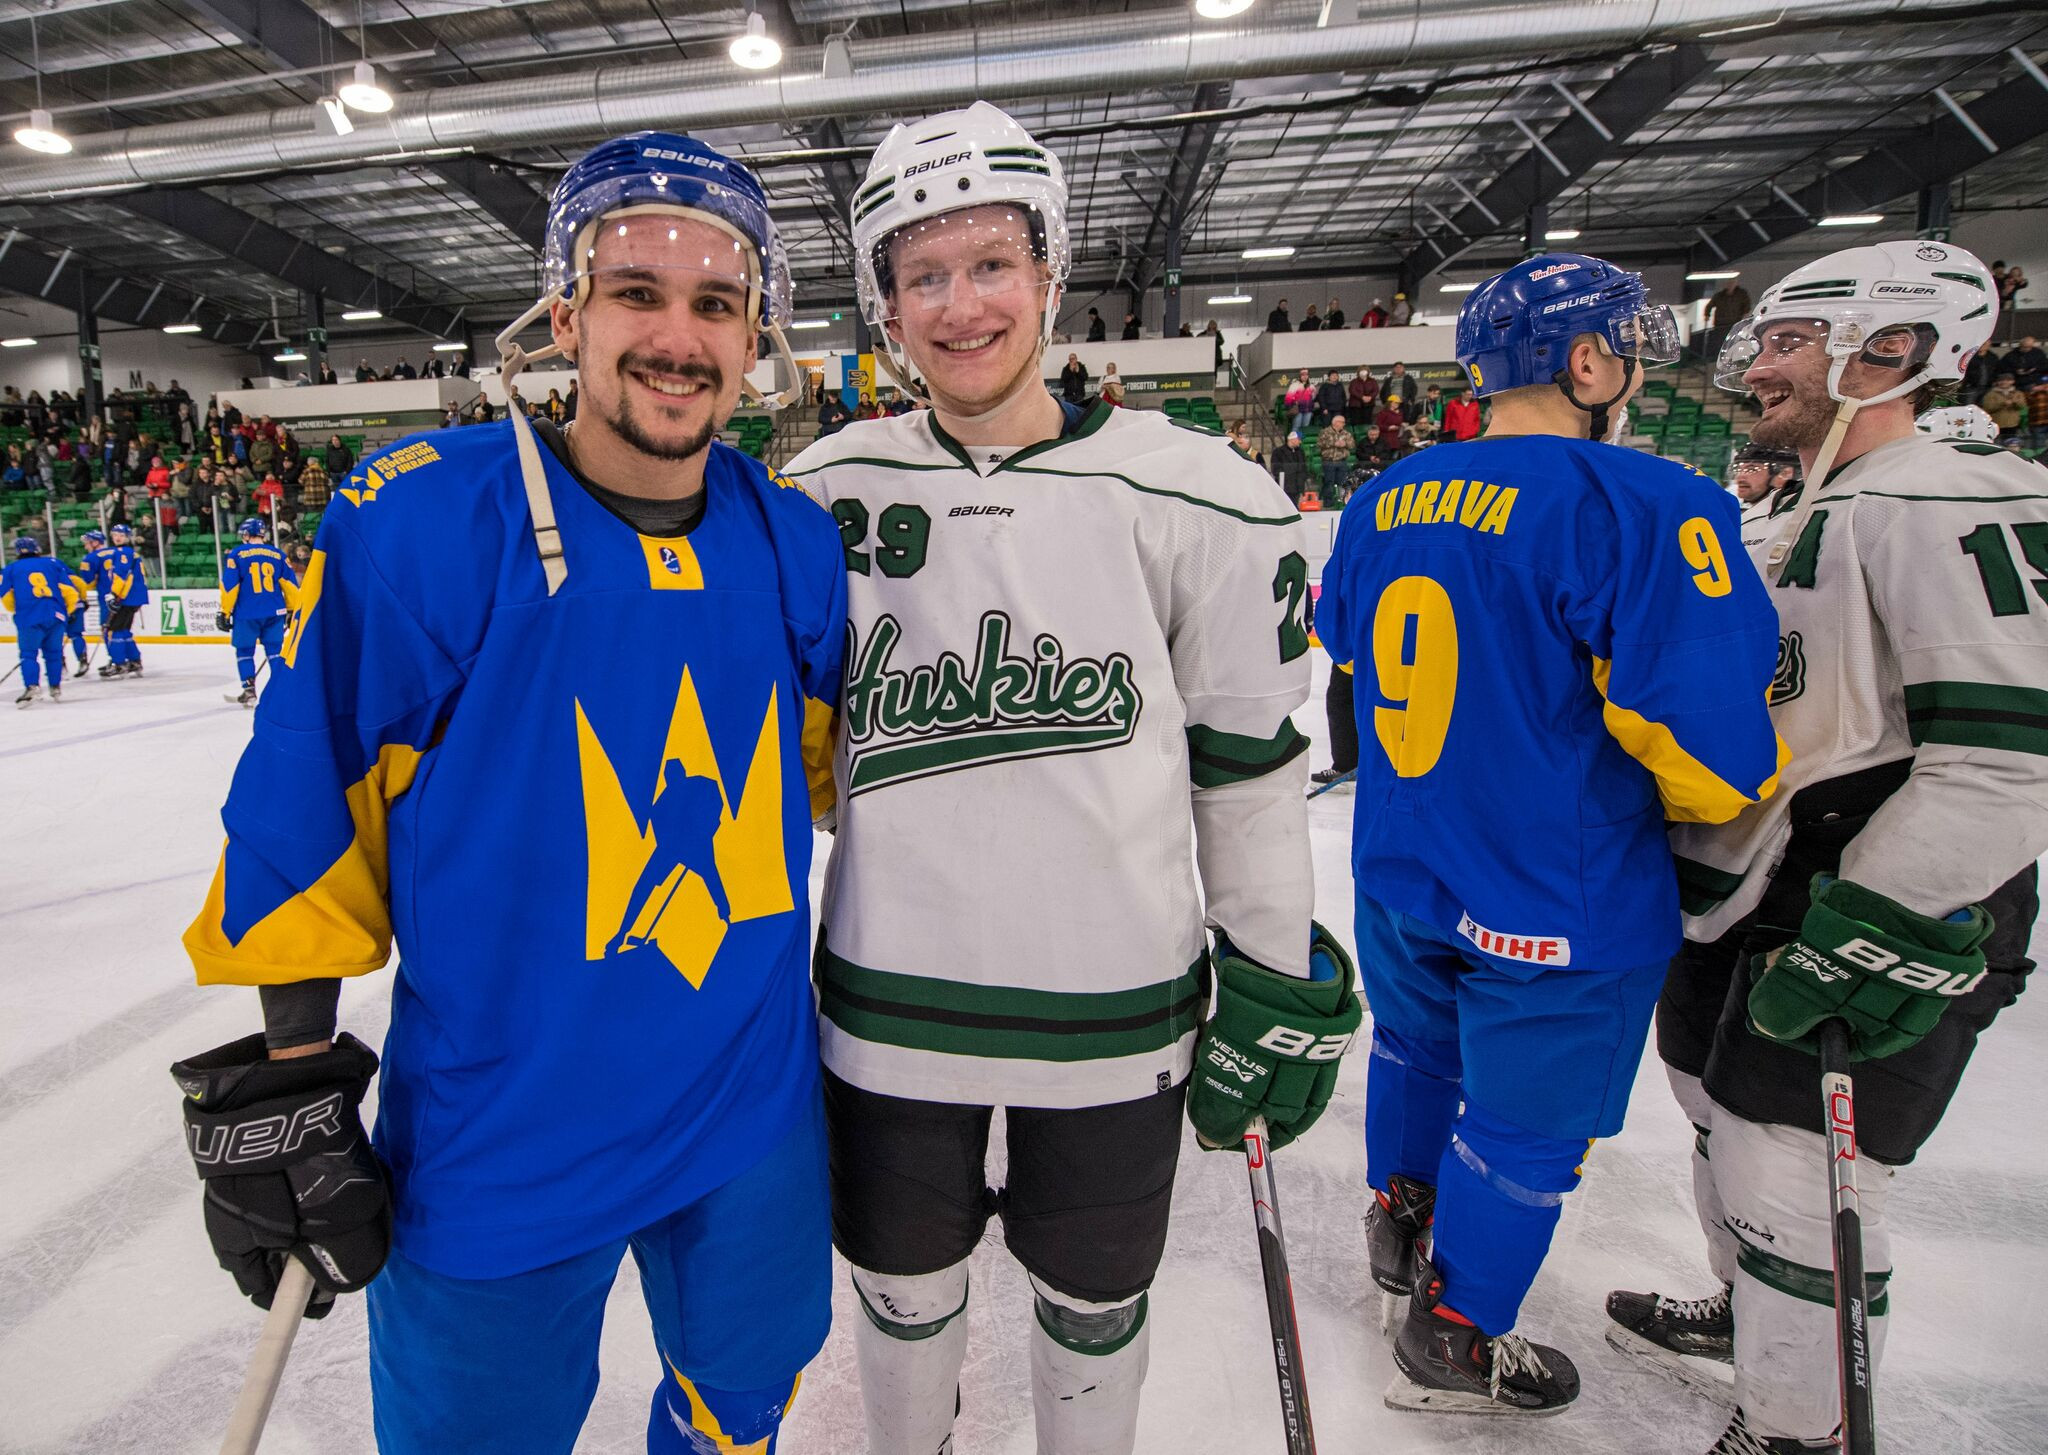 Ukraine's ice hockey team have played a number of exhibition matches in Canada as part of their build-up for Lake Placid 2023 ©University of Saskatchewan Huskie Athletics